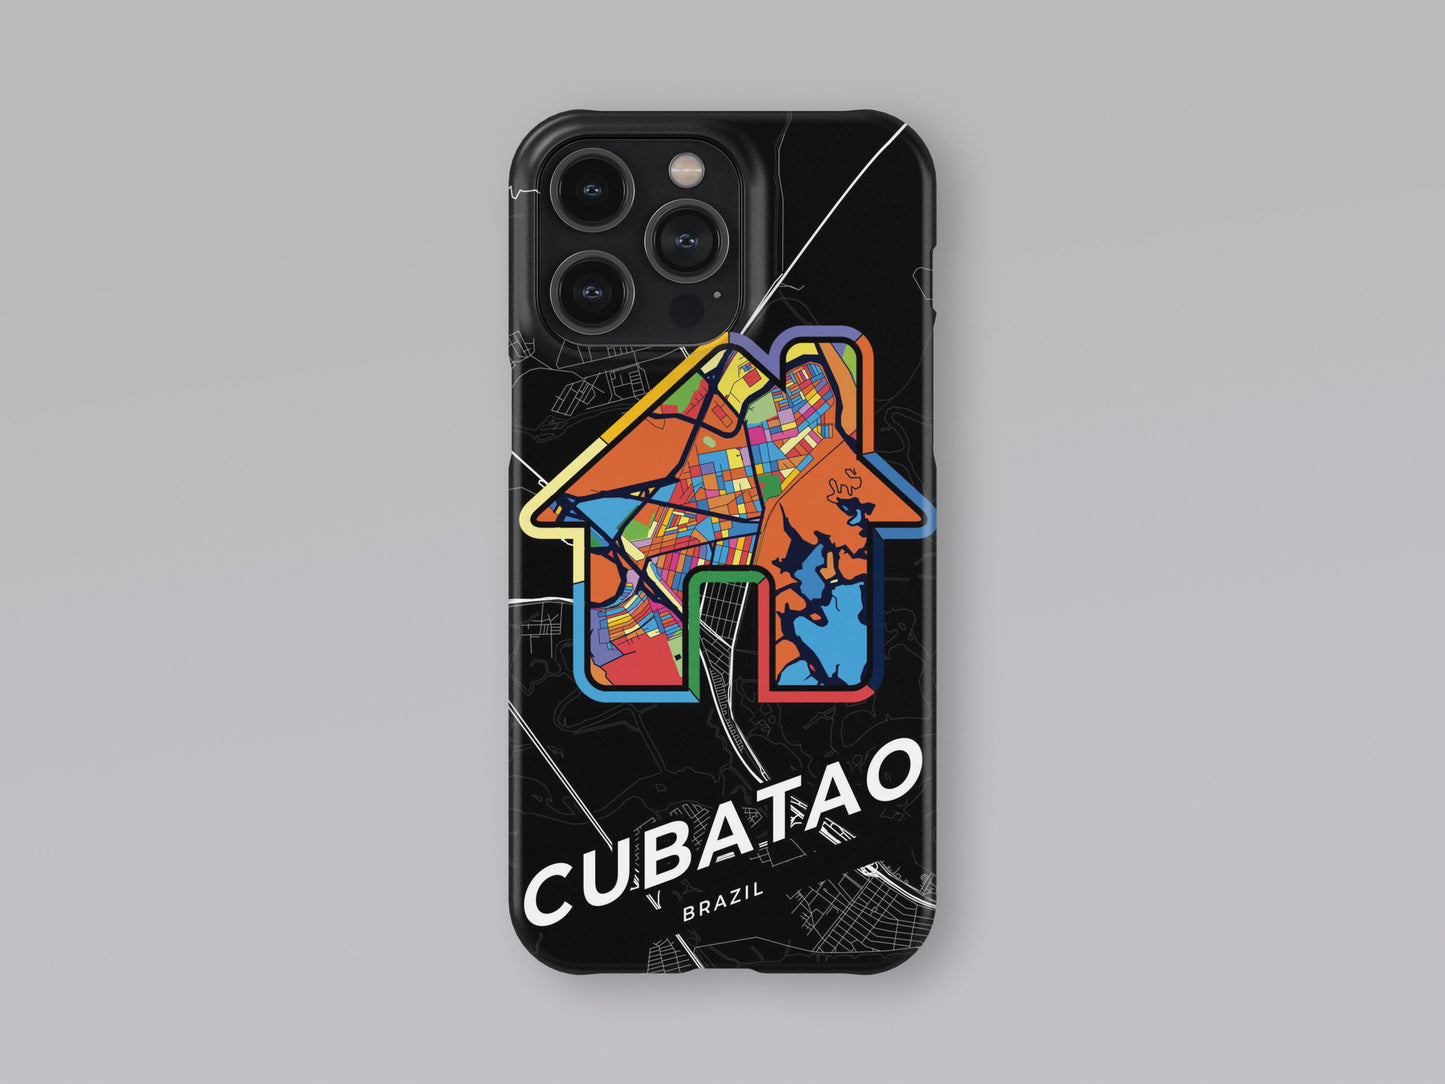 Cubatao Brazil slim phone case with colorful icon. Birthday, wedding or housewarming gift. Couple match cases. 3